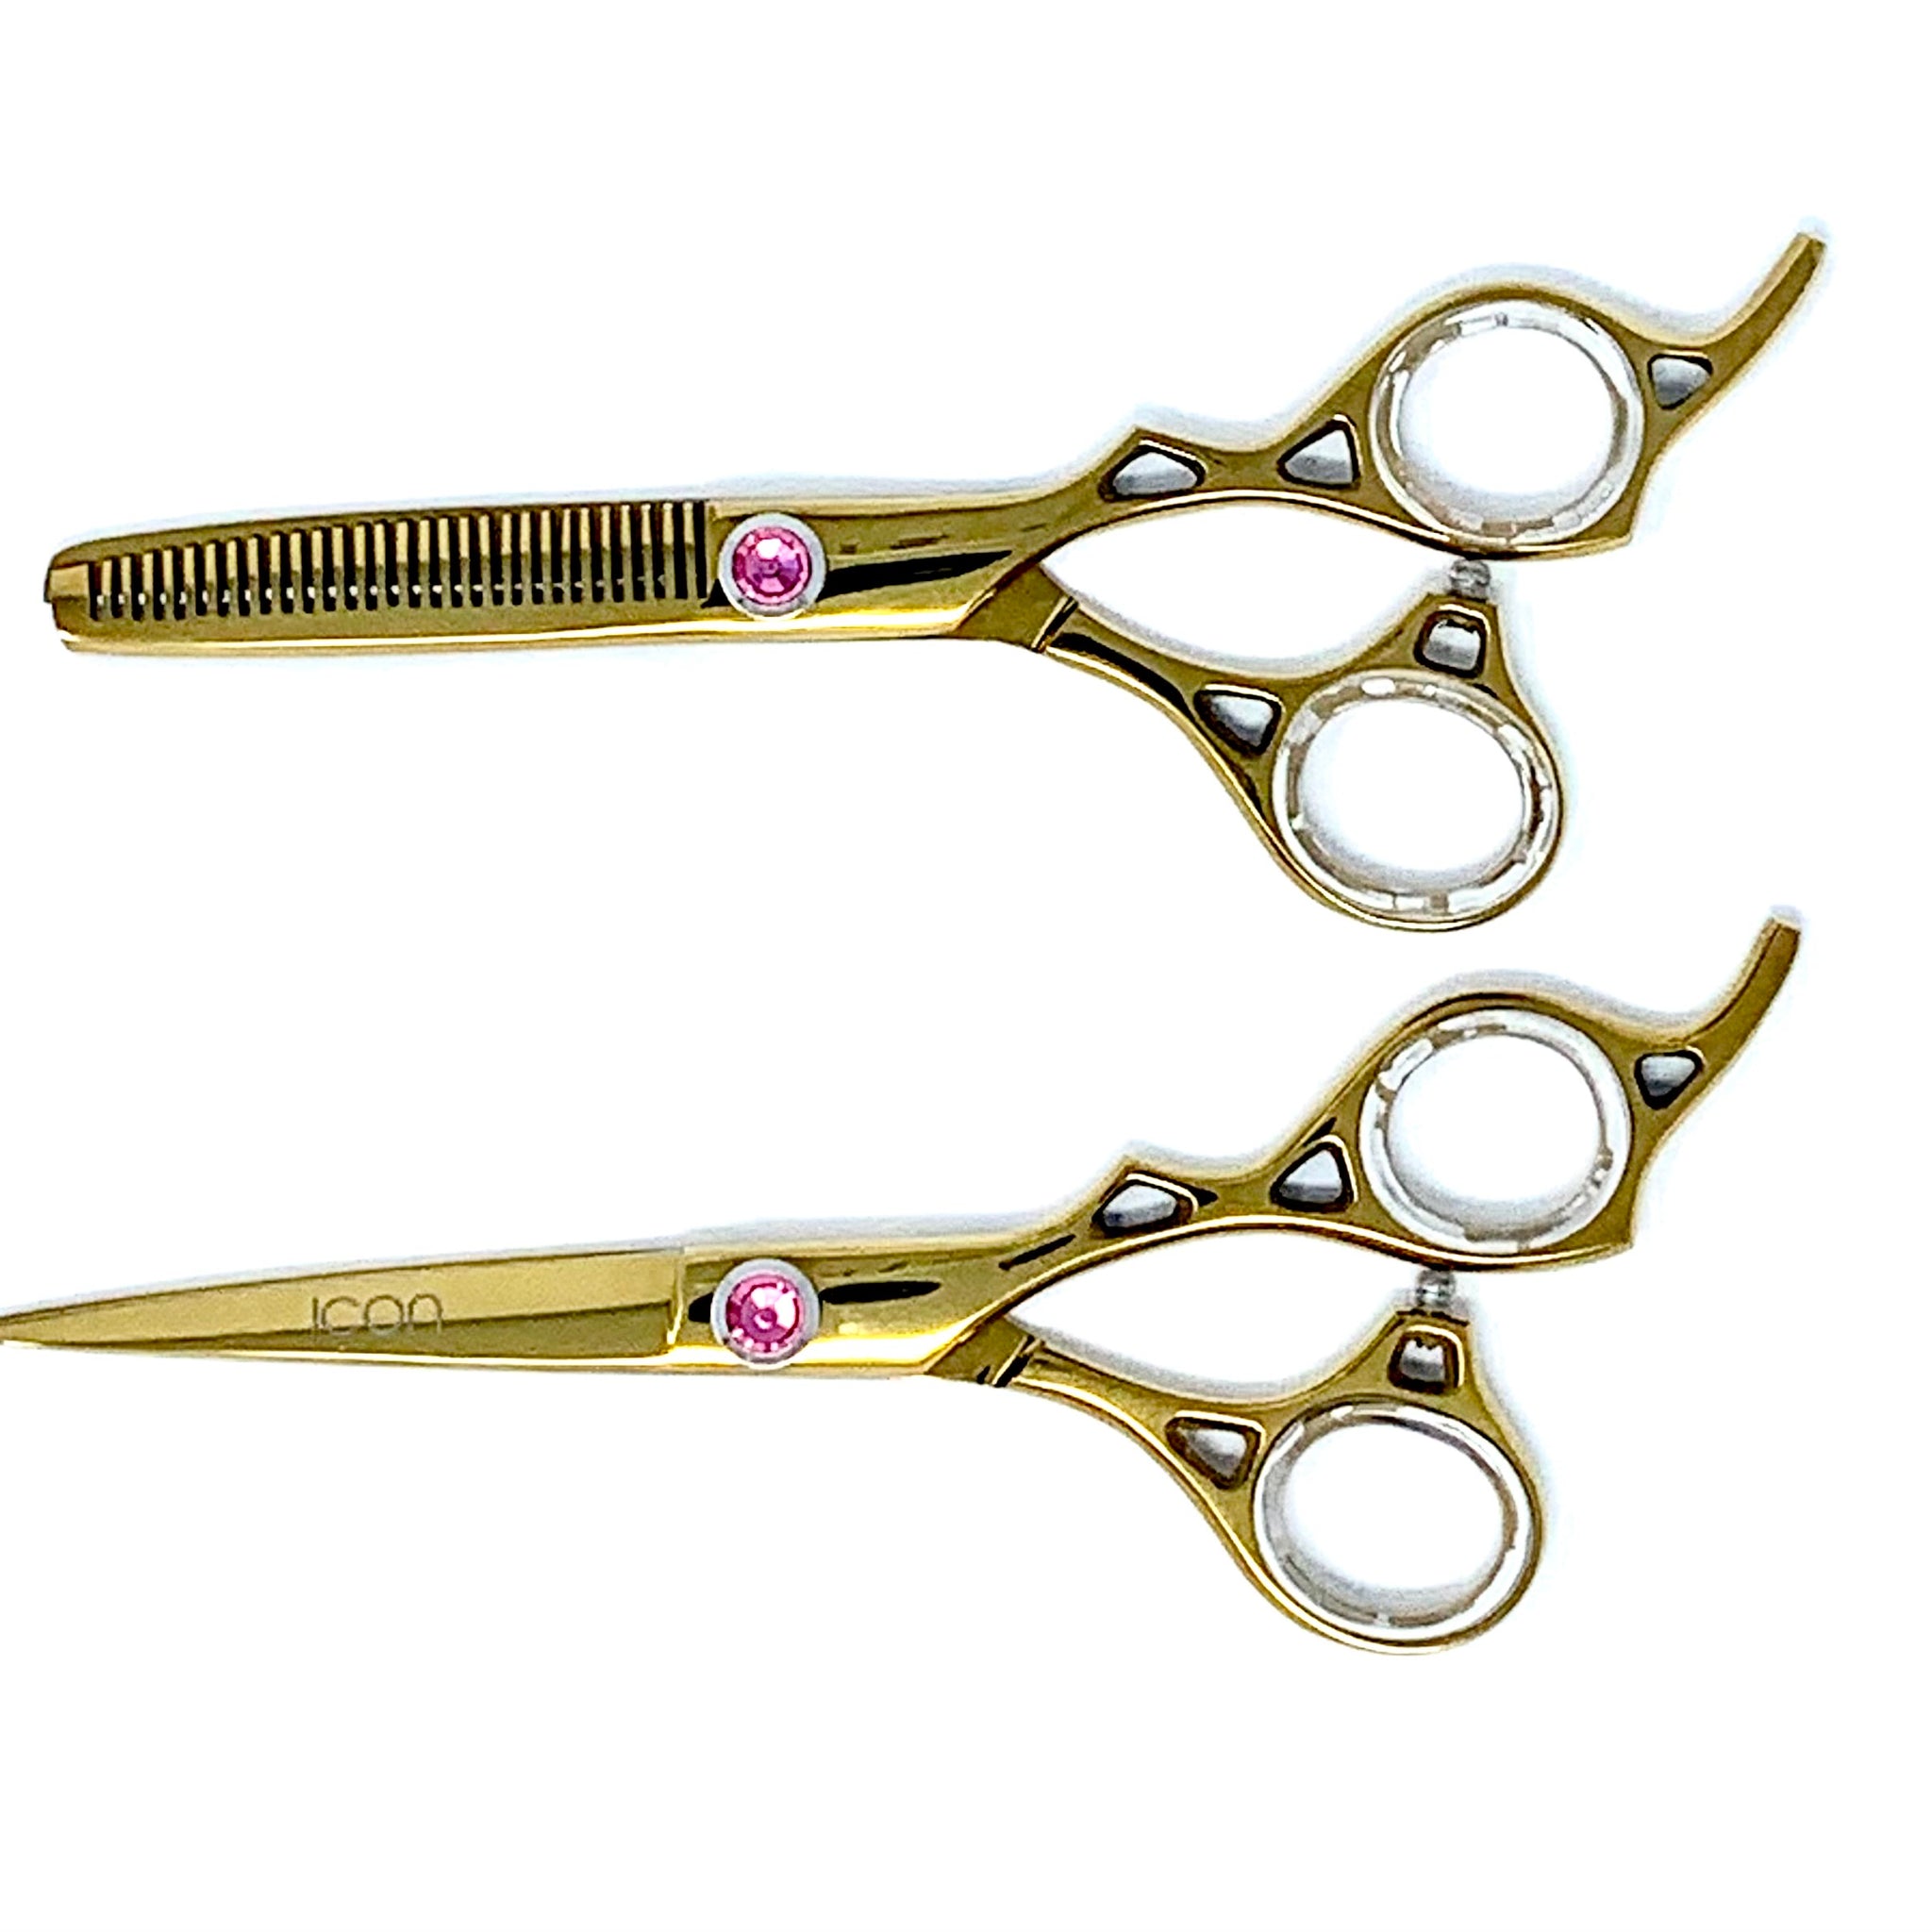 NEW *  THE HAMMER SHEAR SET IN GOLD 6.0 ICT-107